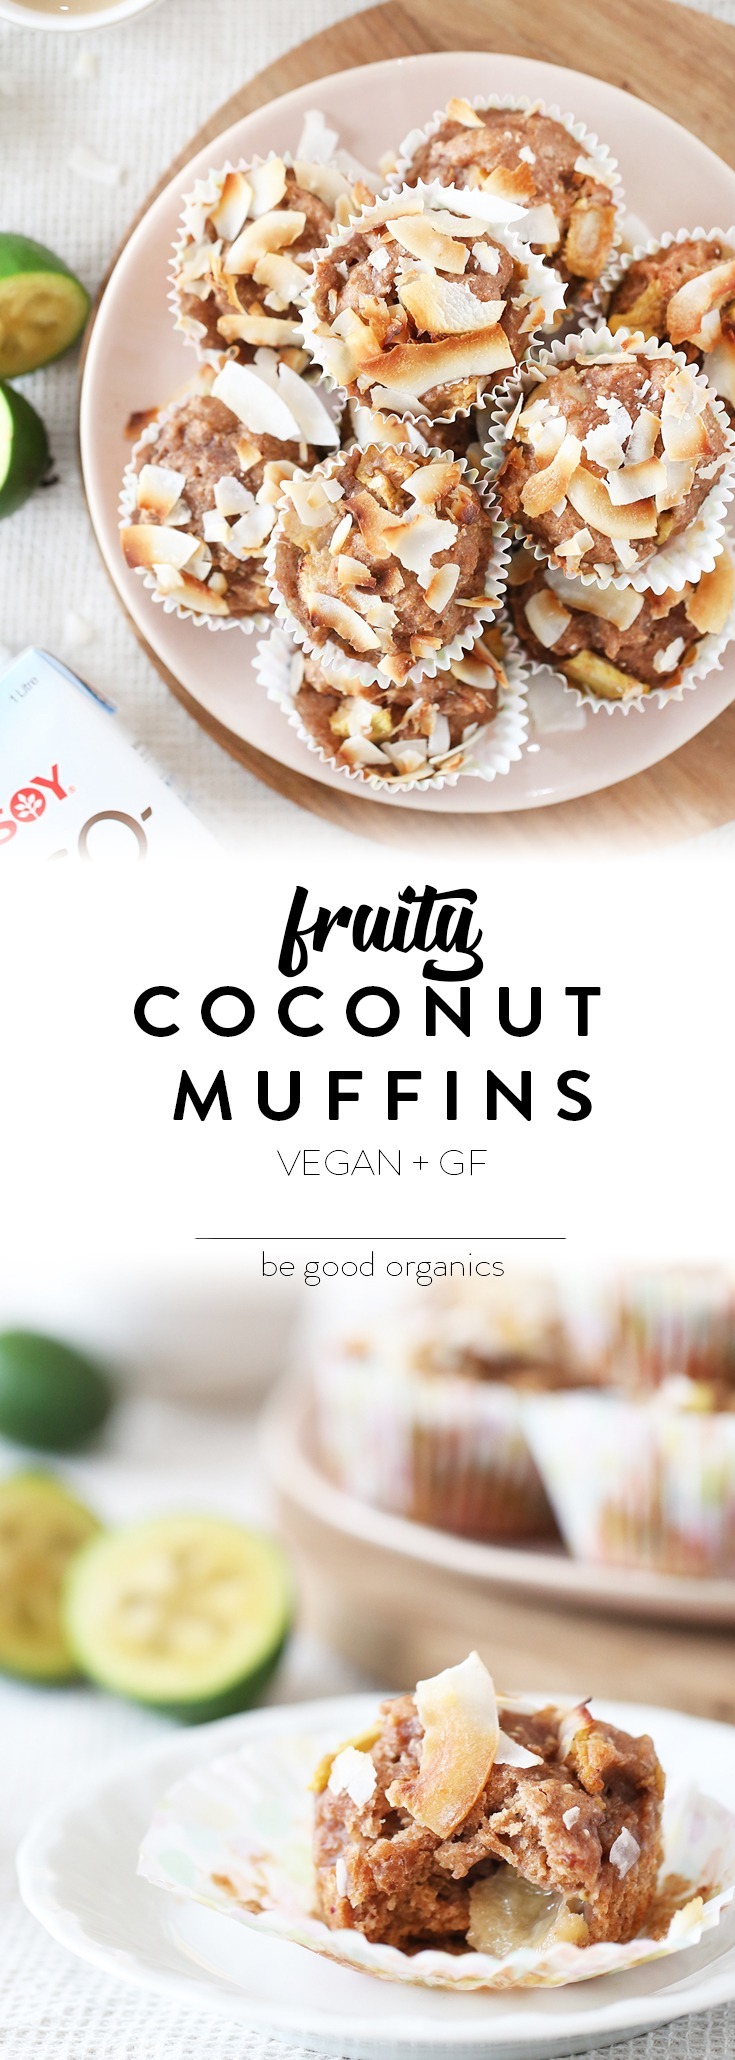 These light and fruity muffins use one of my favourite fruits – feijoas! If you’re a feijoa fan you’ll love these (and if not, come to NZ to try them!) Vegan, dairy, egg, gluten and refined added sugar free.